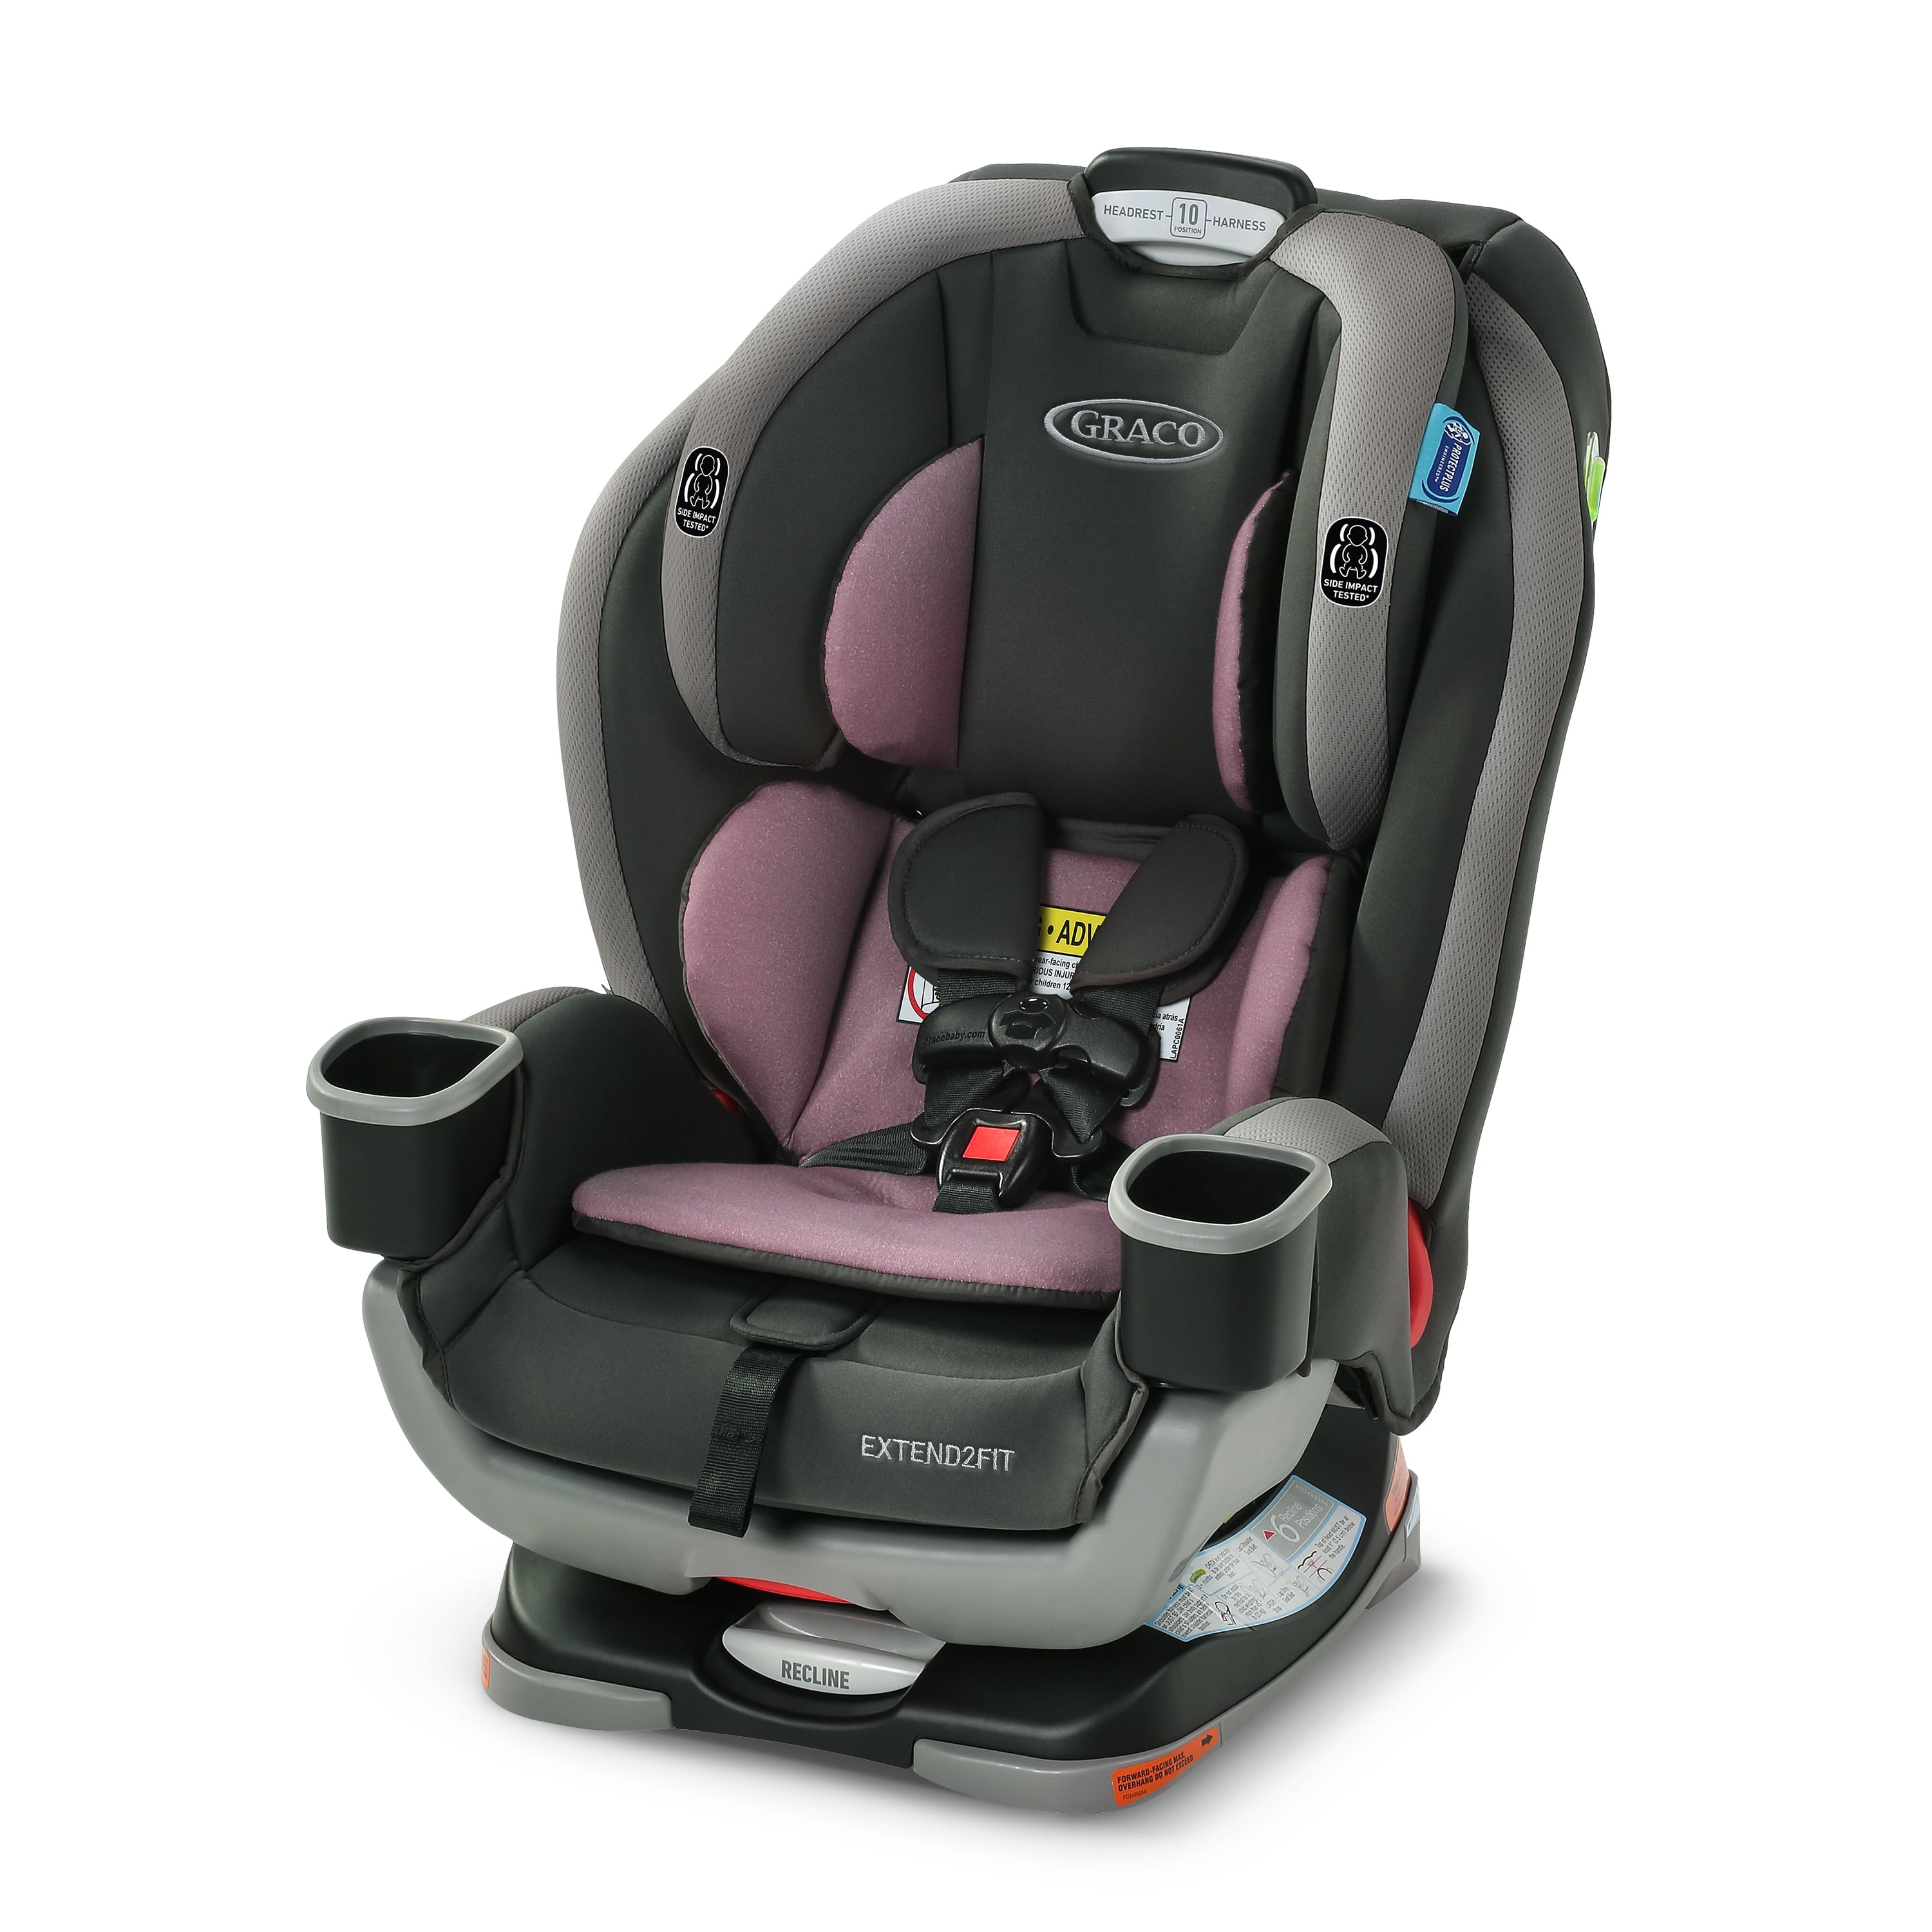 Graco 3 in 1 Car Seat Options and Variations